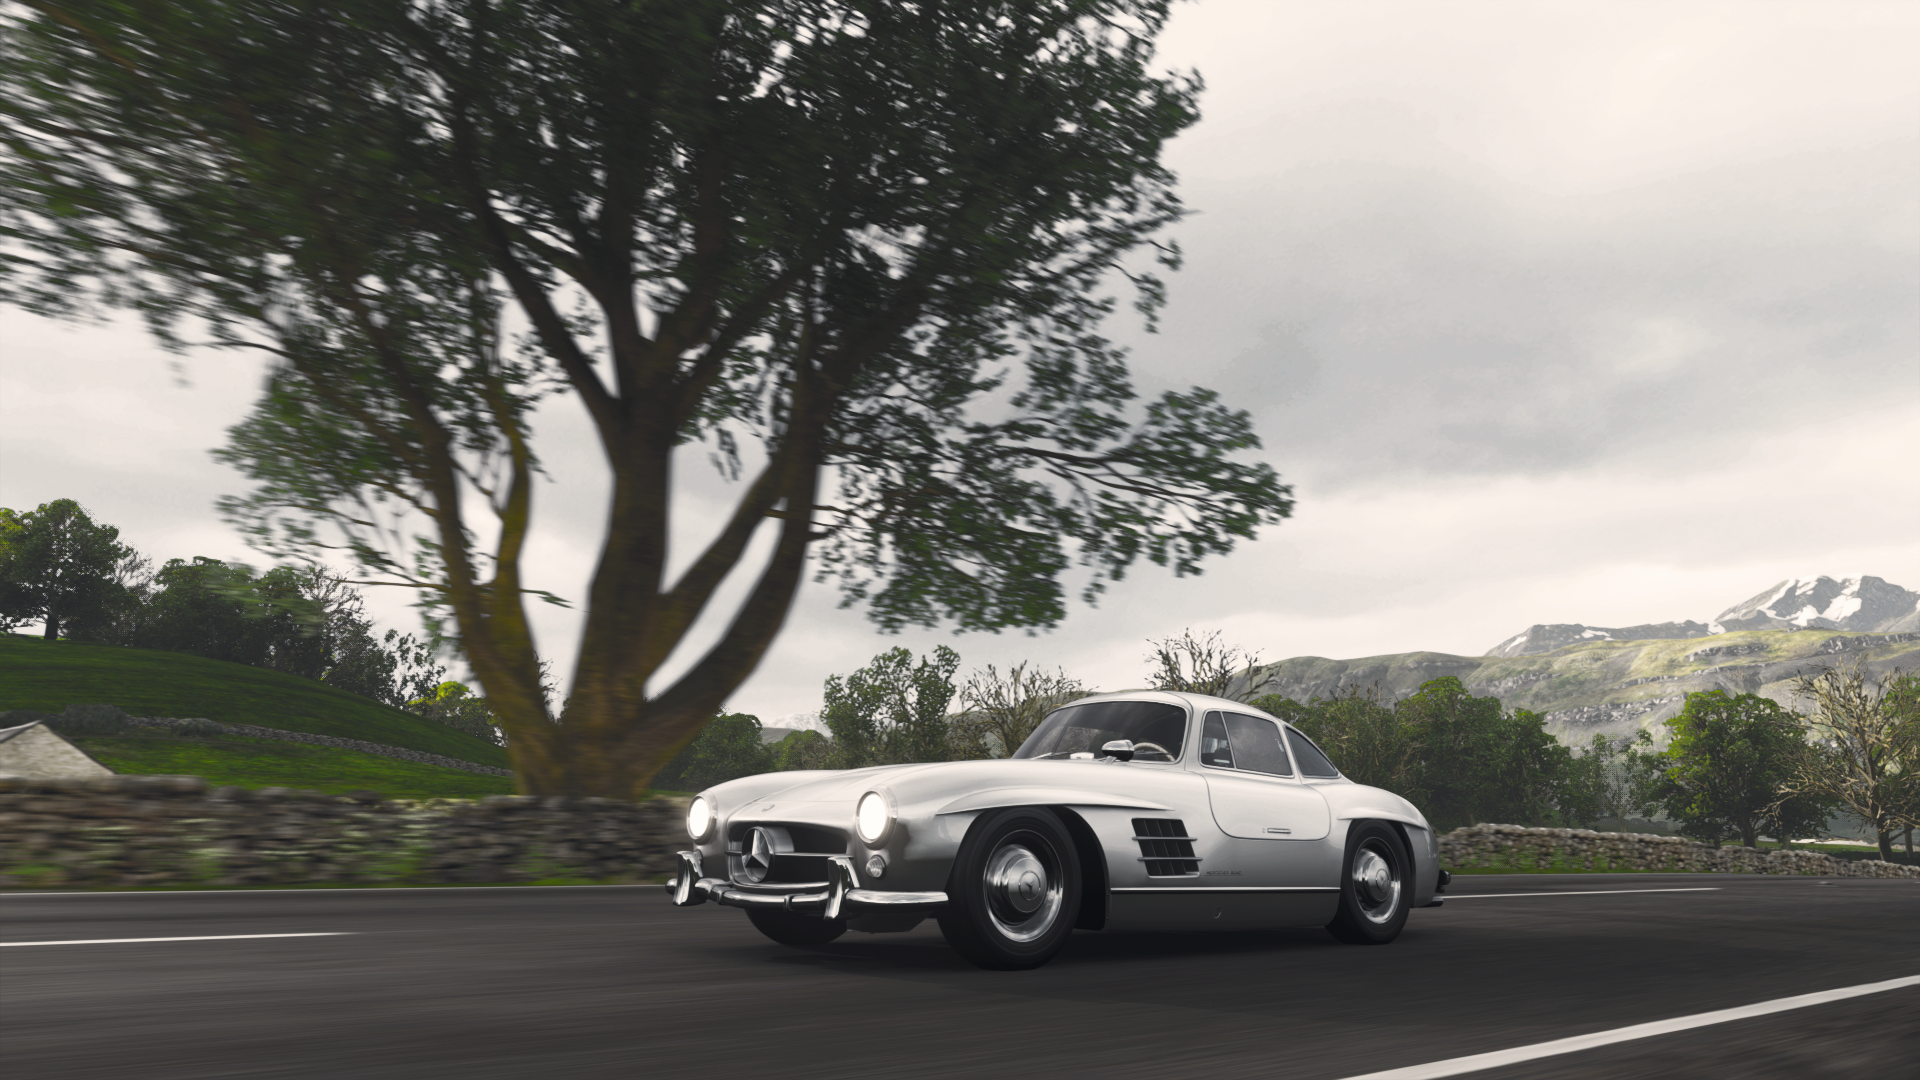 General 1920x1080 Mercedes-Benz car vintage classic car silver Forza Horizon 4 Mercedes-Benz SL Mercedes-Benz 300SL oldtimers silver cars vehicle screen shot video games